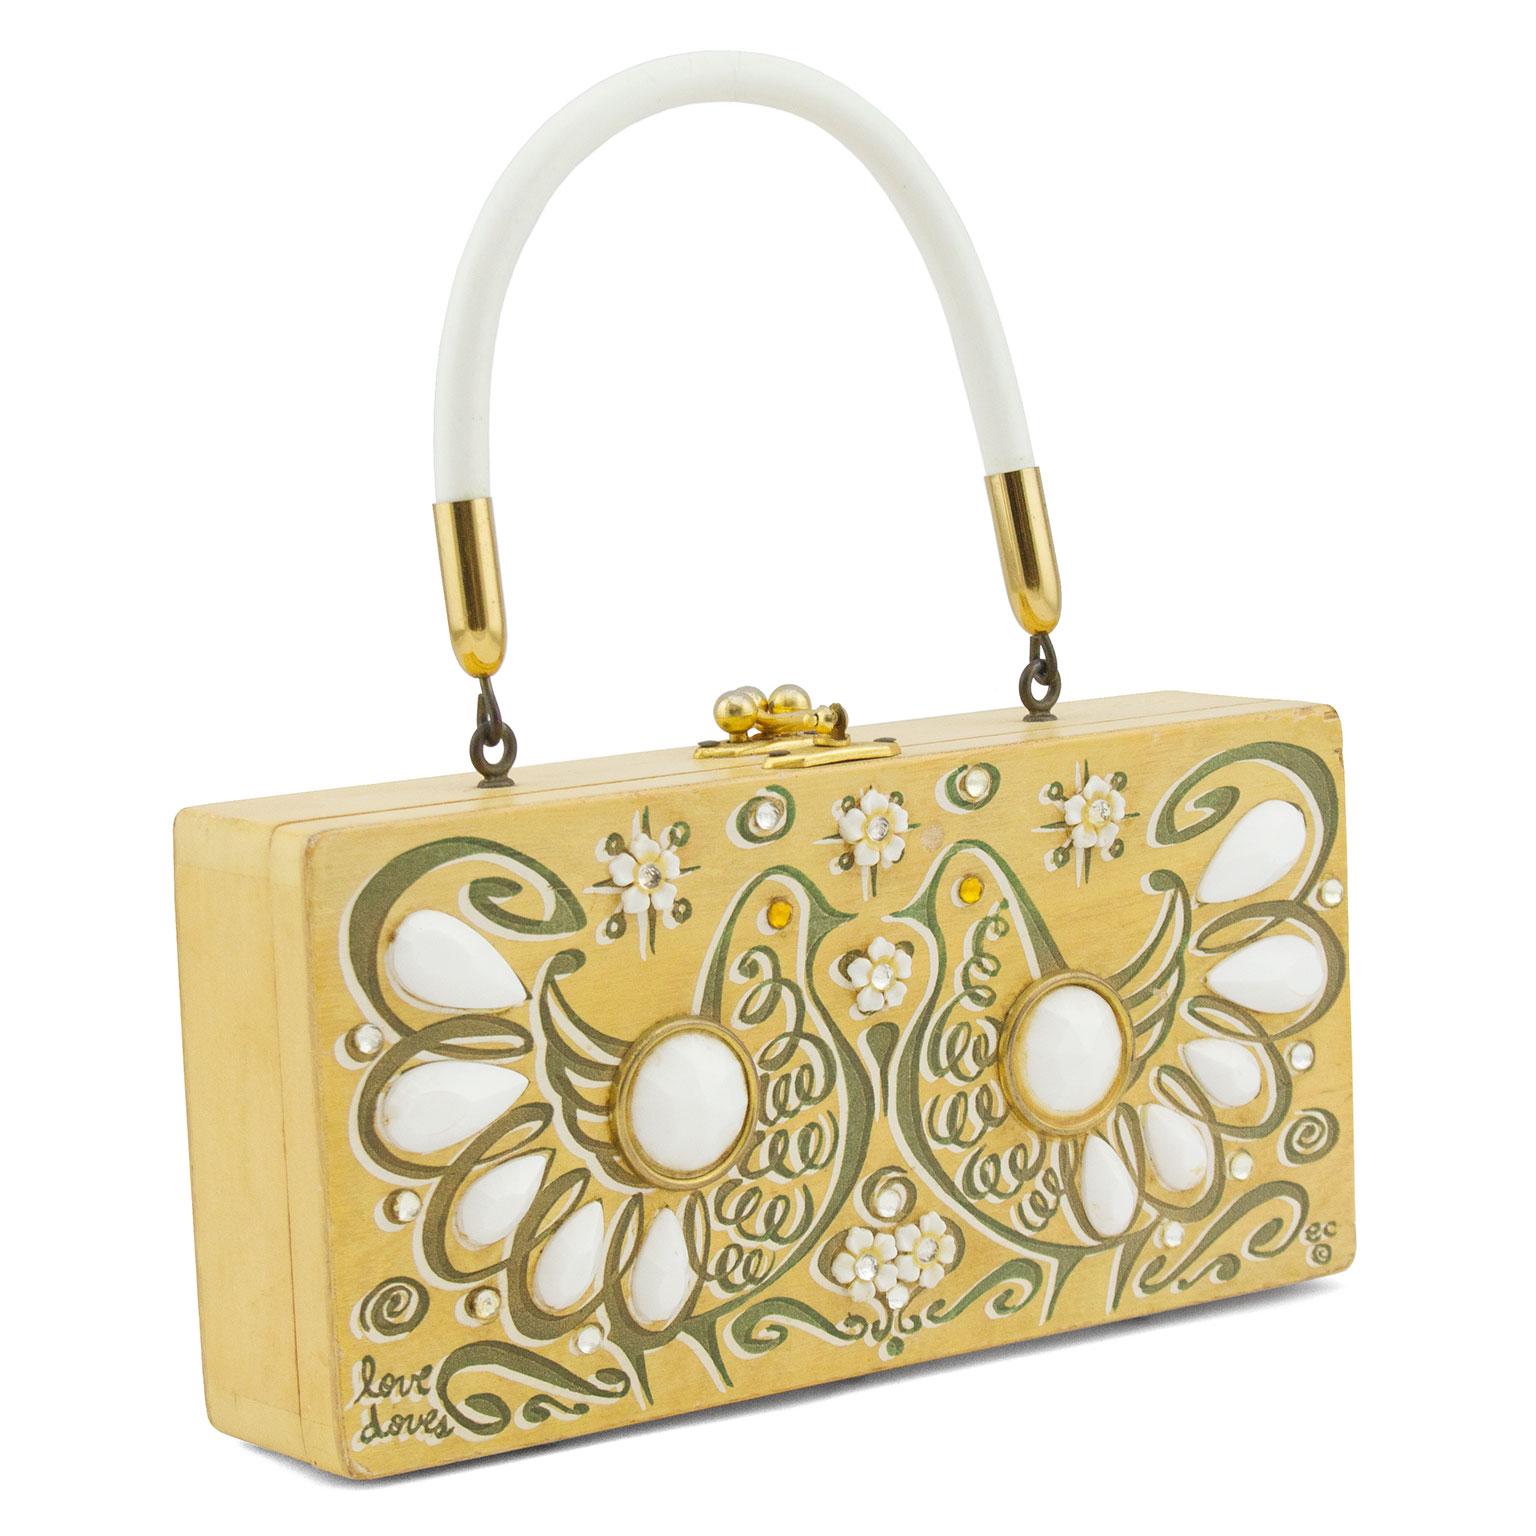 1960's Enid Collin pine coloured wood rectangle box handbag. The bag features two hand painted doves facing each other with applied white beads, rhinestone and floral embellishment. White plastic hard handle. Gold tone hardware. Interior features a